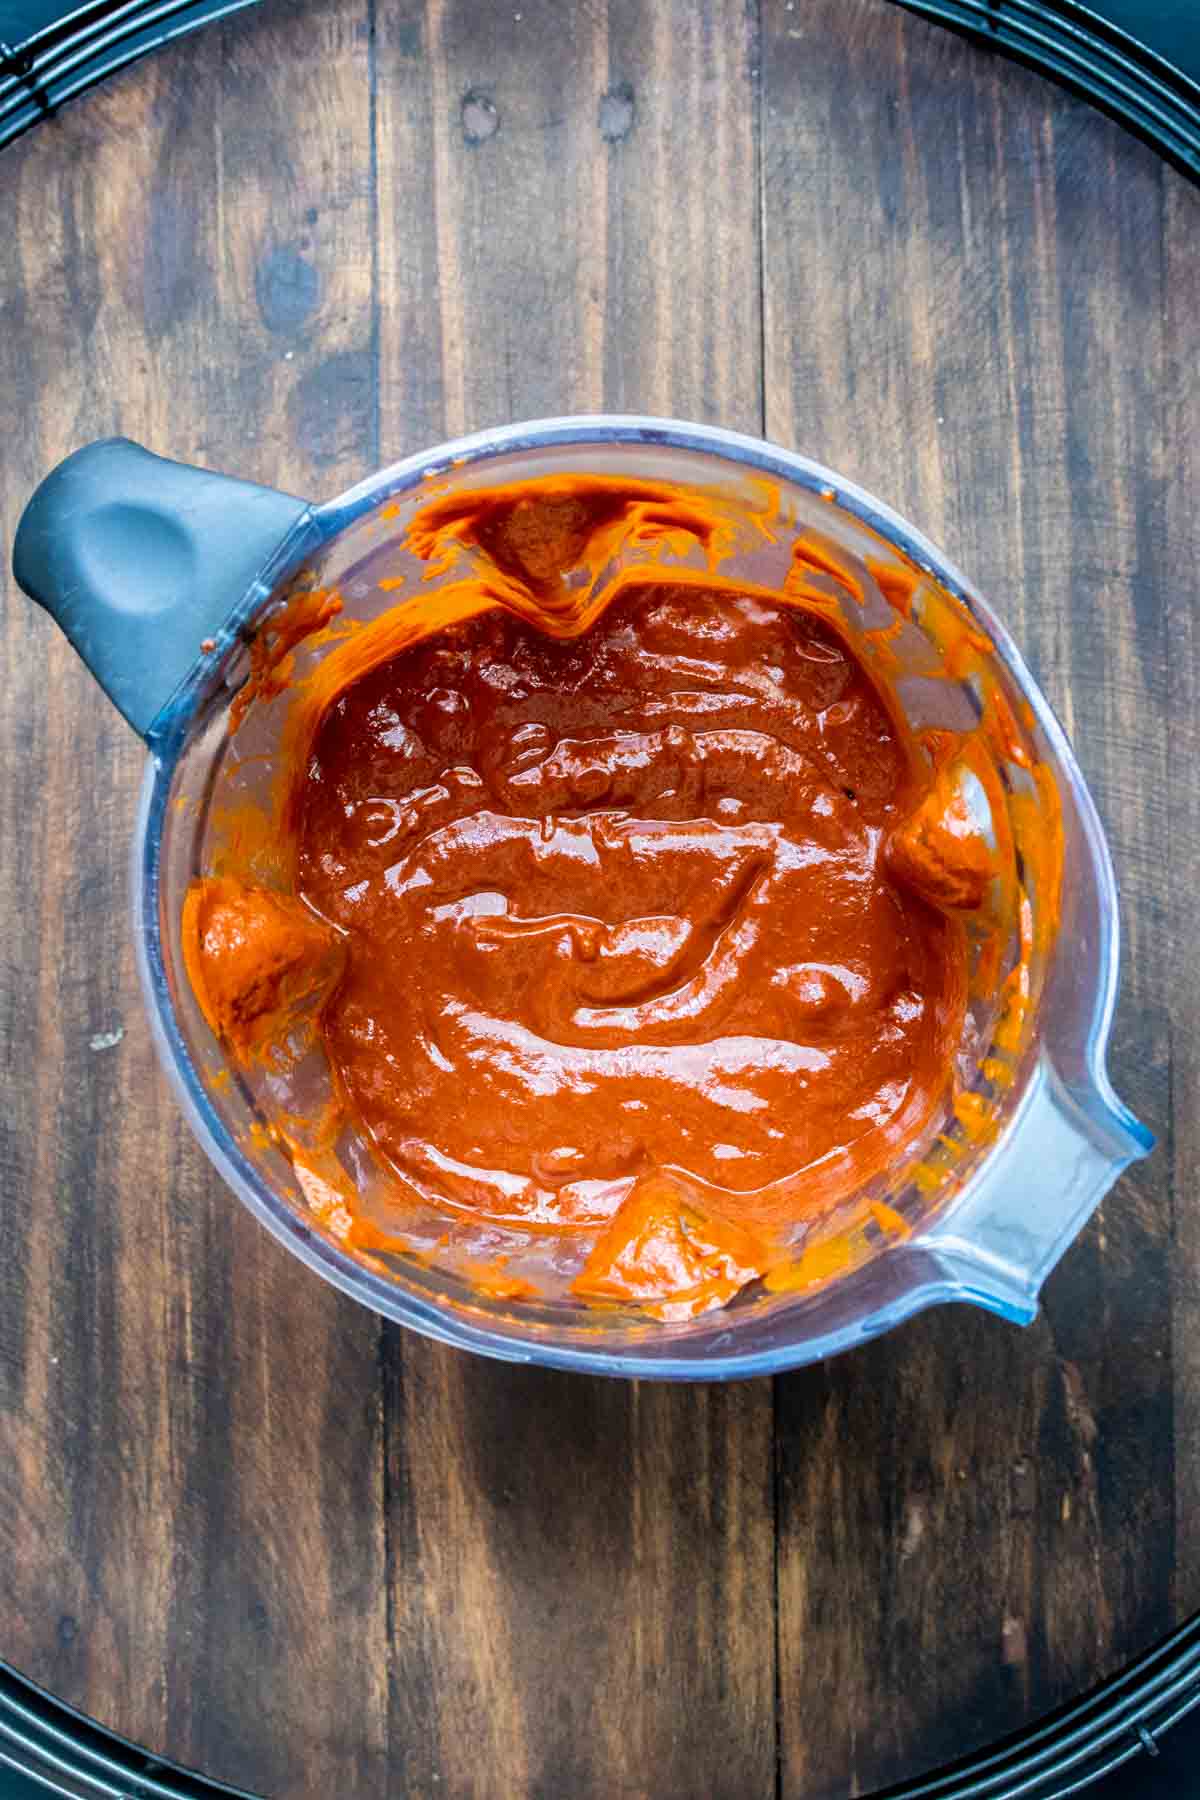 Top view of a blender with red sauce inside